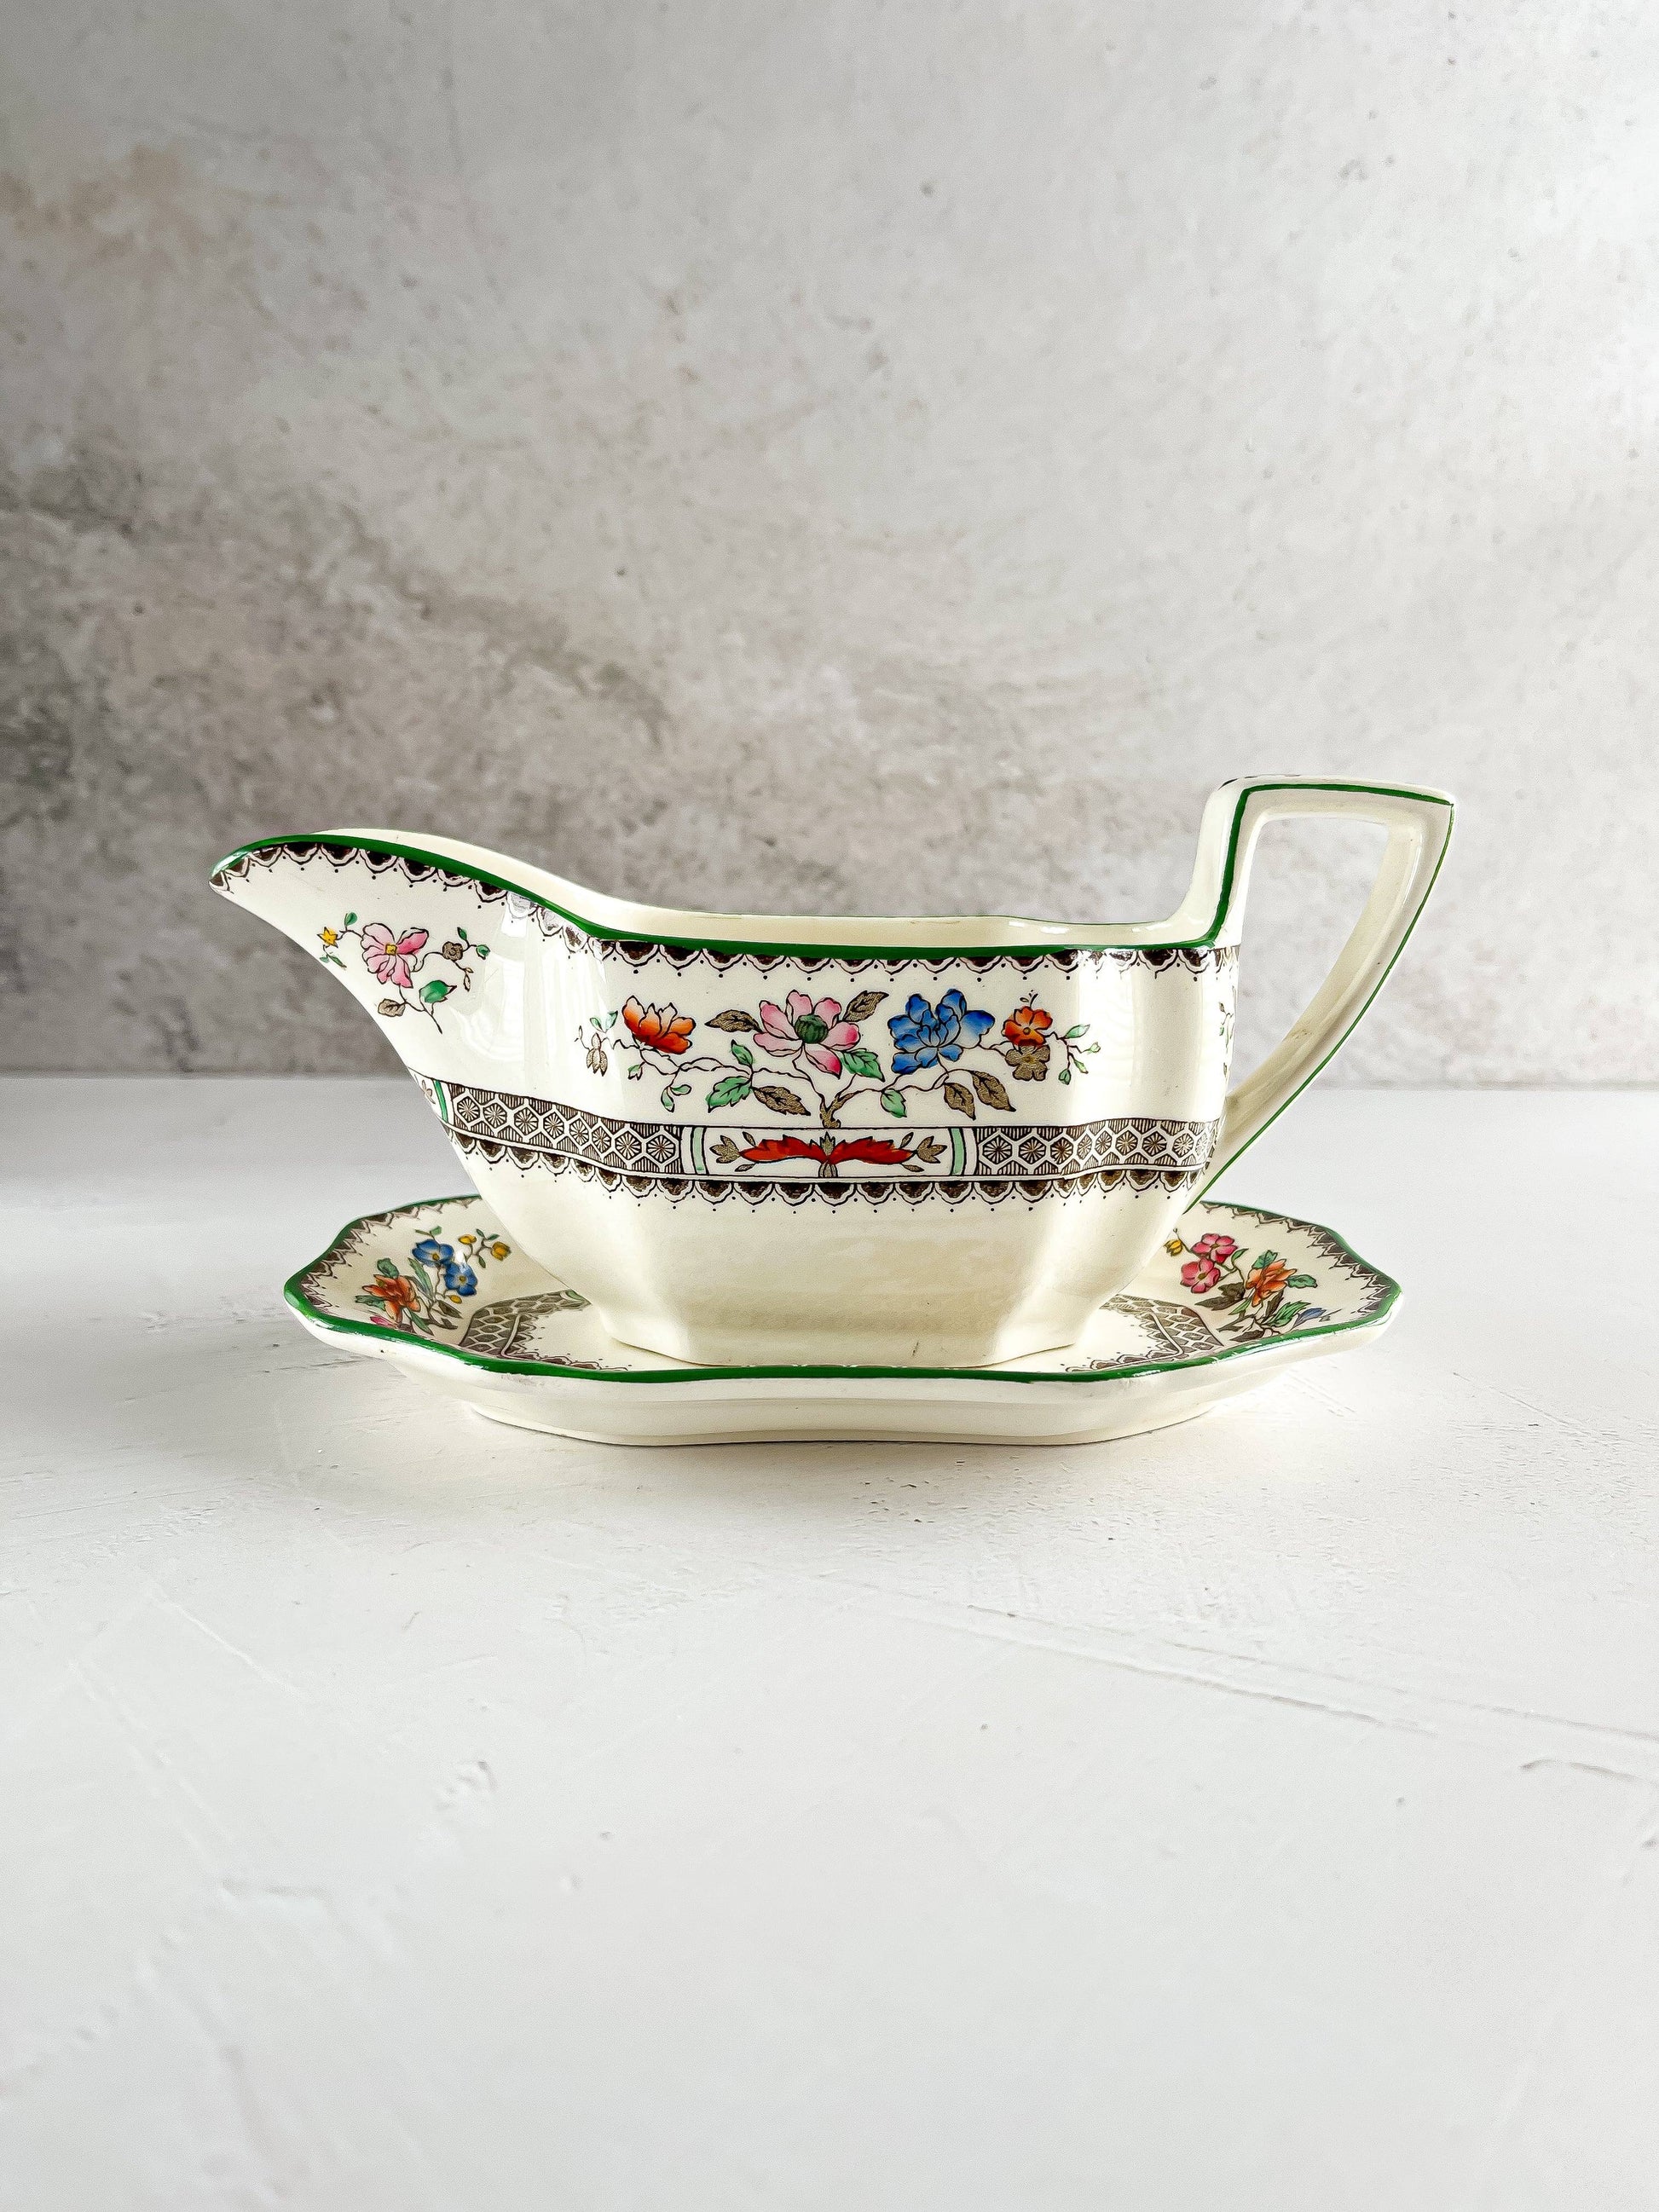 Copeland Spode Gravy Boat & Underplate with Flat Handle - 'Chinese Rose' Collection (Older Version) - SOSC Home